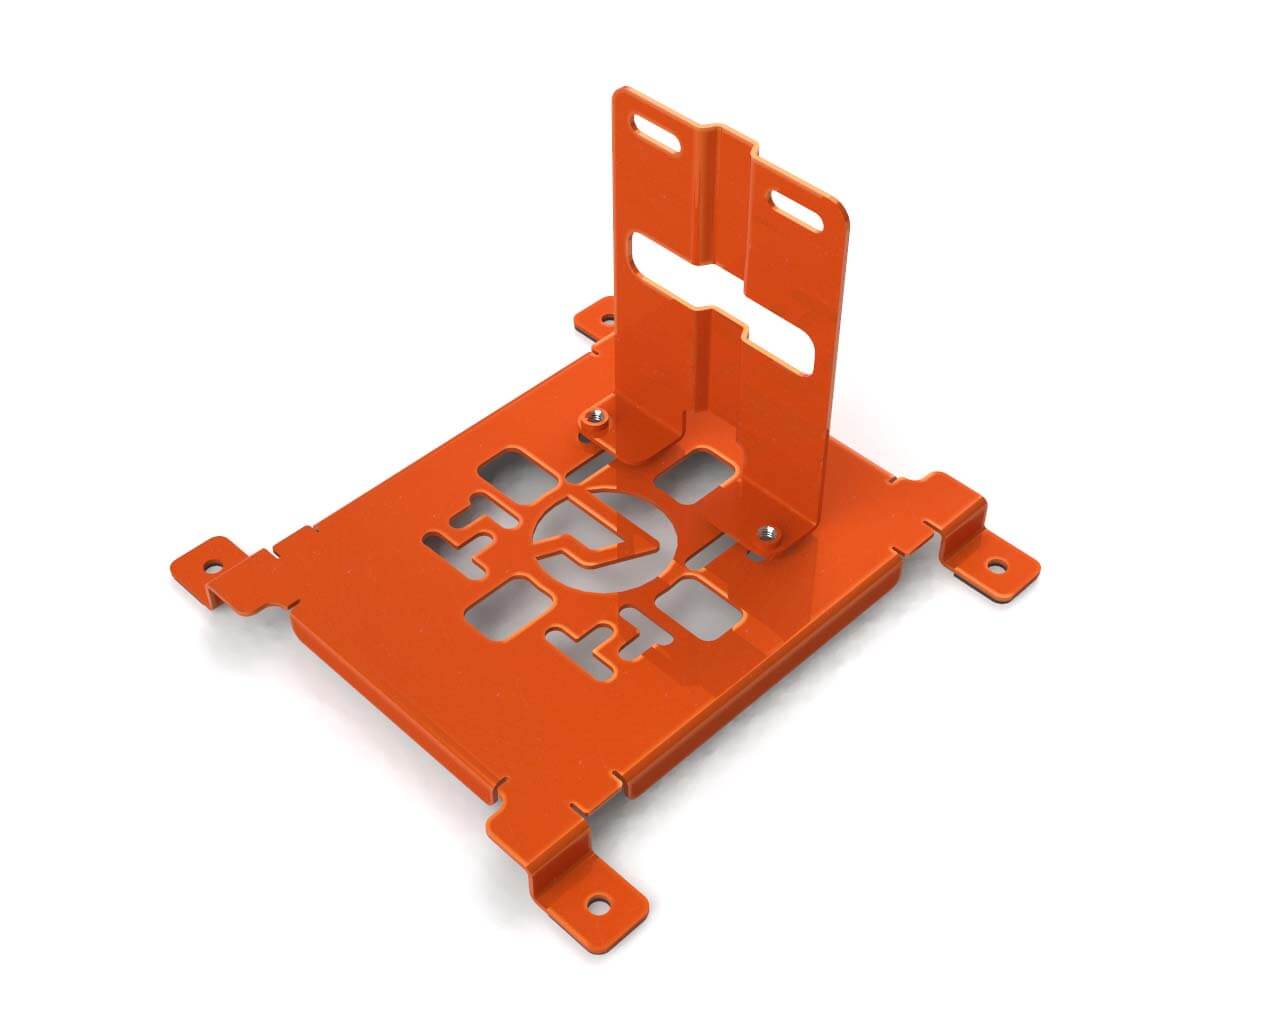 PrimoChill SX CTR2 Spider Mount Bracket Kit - 140mm Series - PrimoChill - KEEPING IT COOL Candy Copper